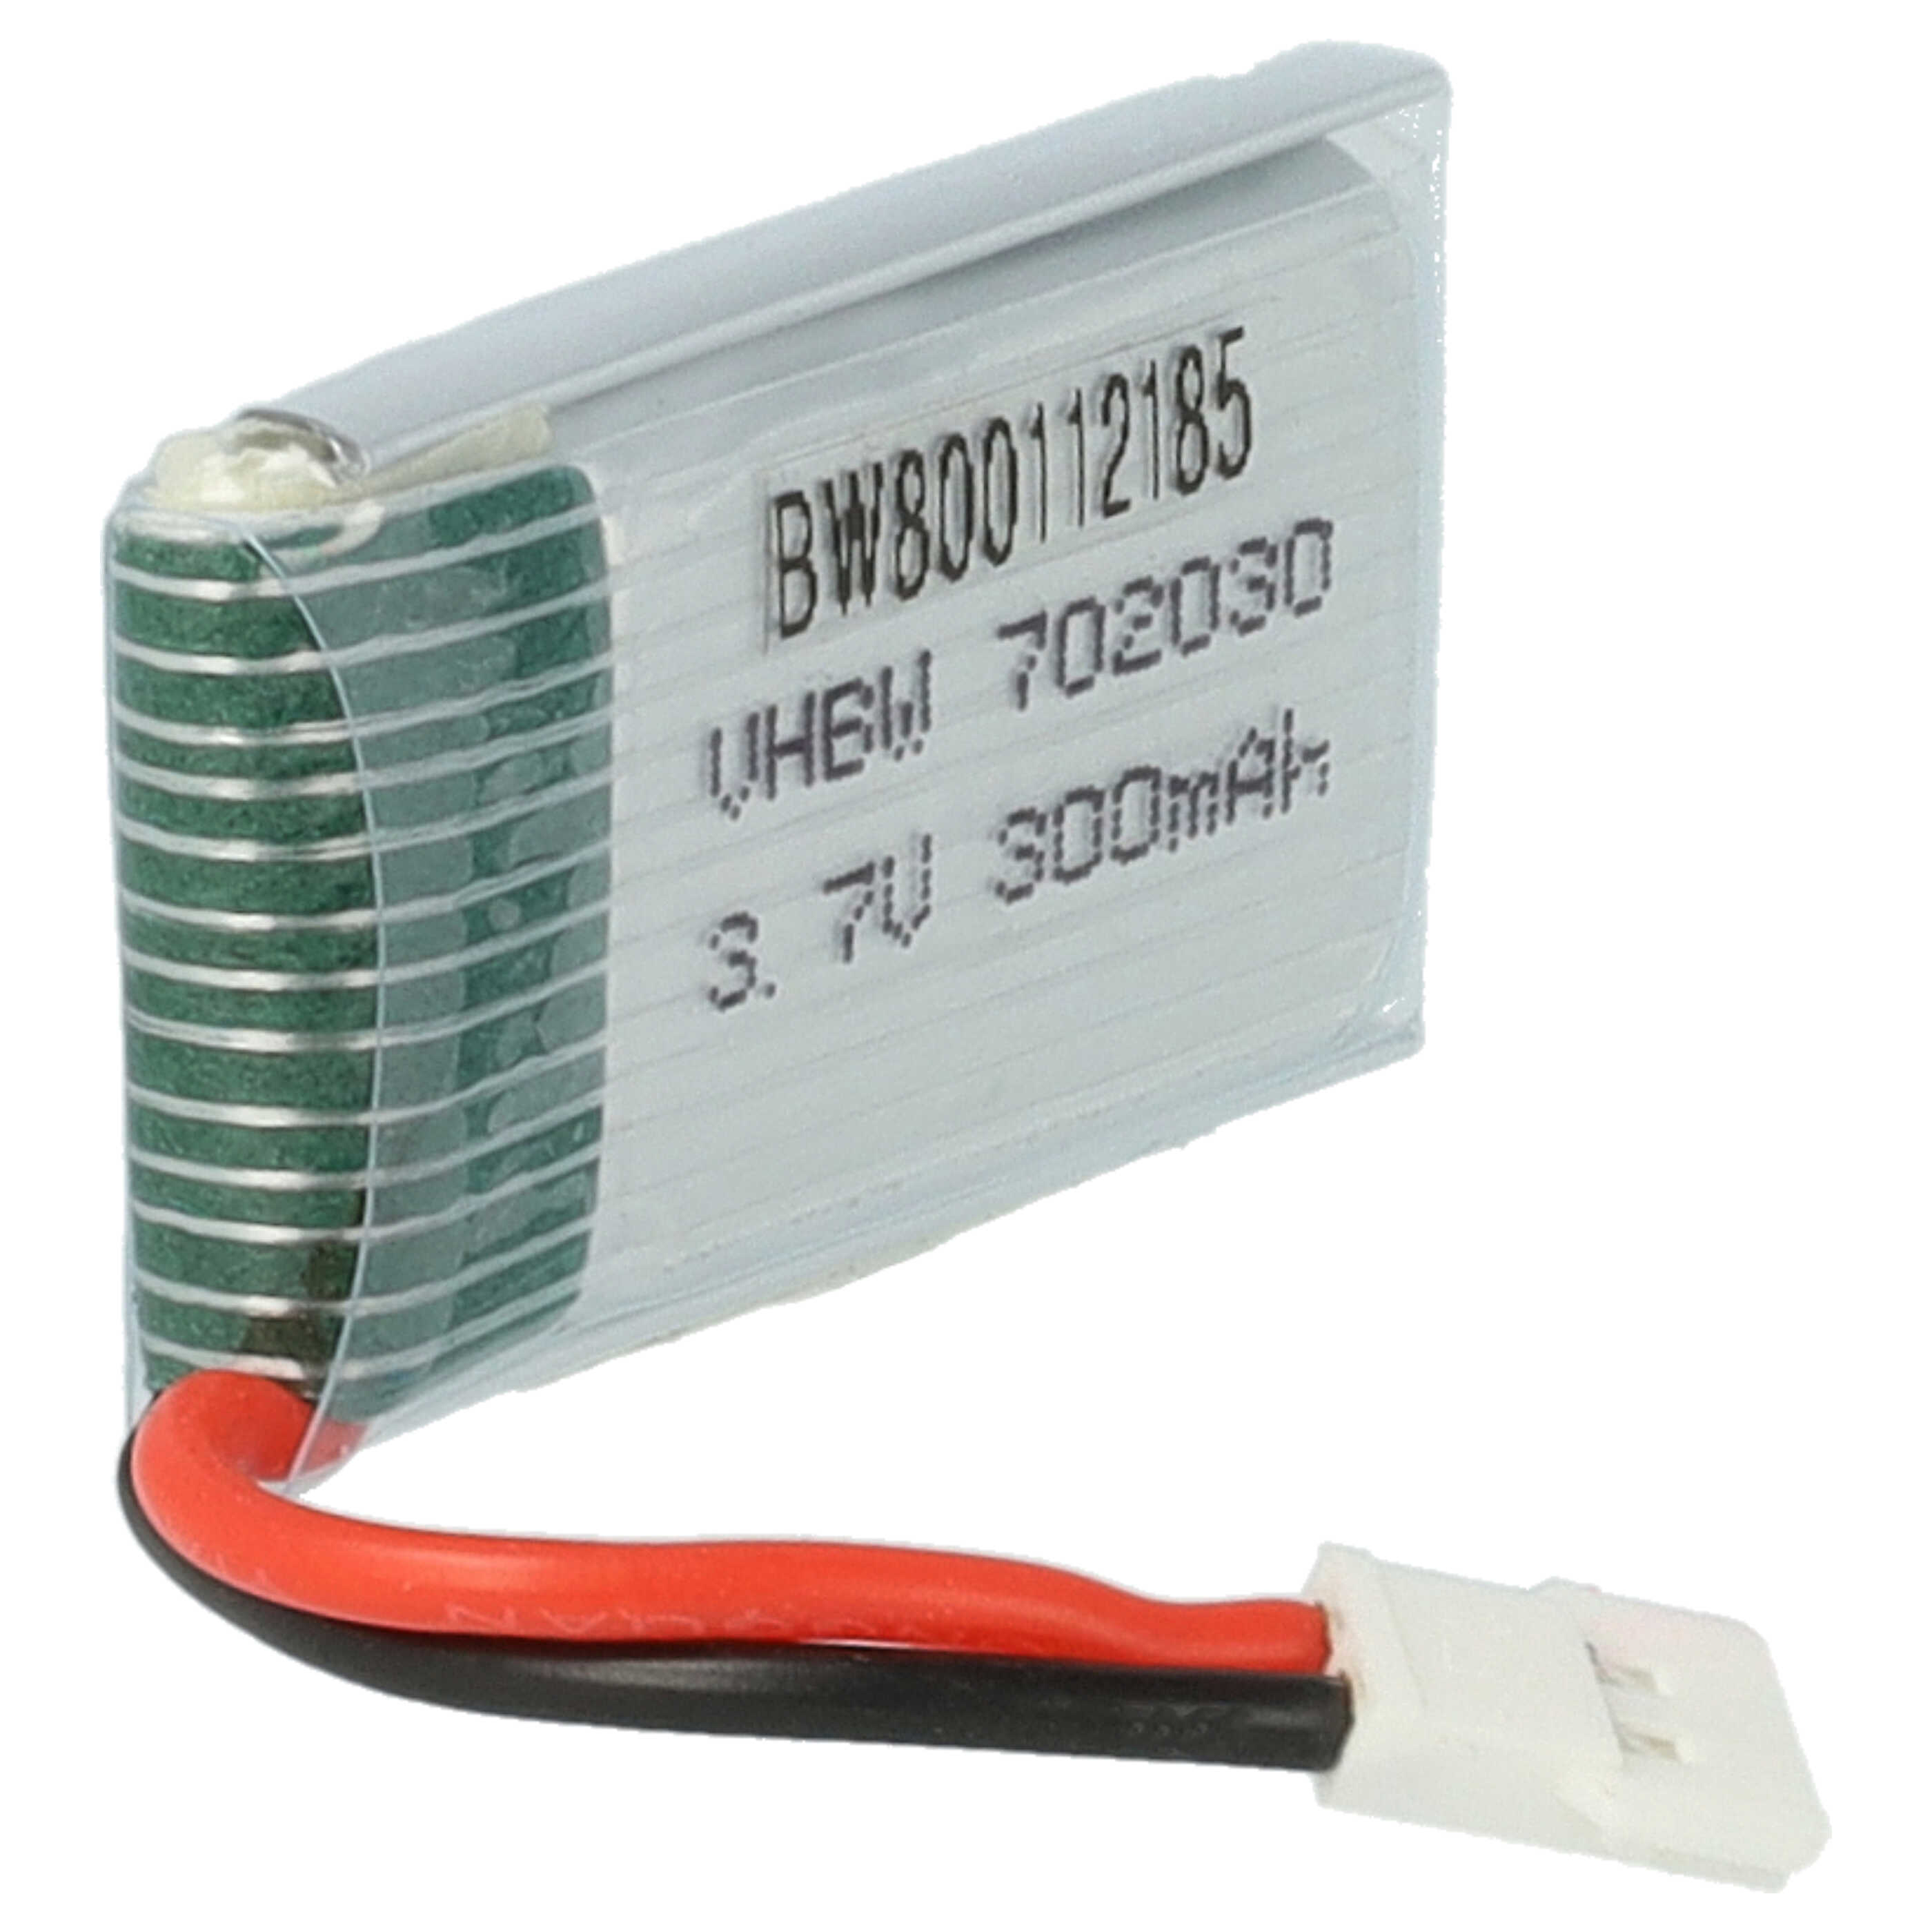 Drone Battery Replacement for Revell 43935 - 300mAh 3.7V Li-polymer